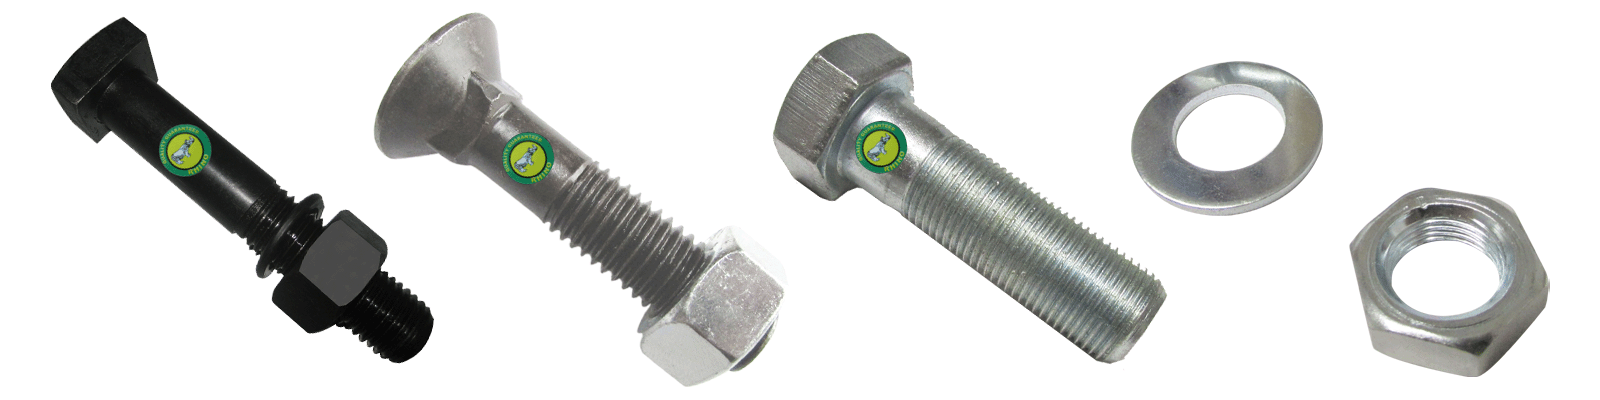 fasteners manufacturers in India